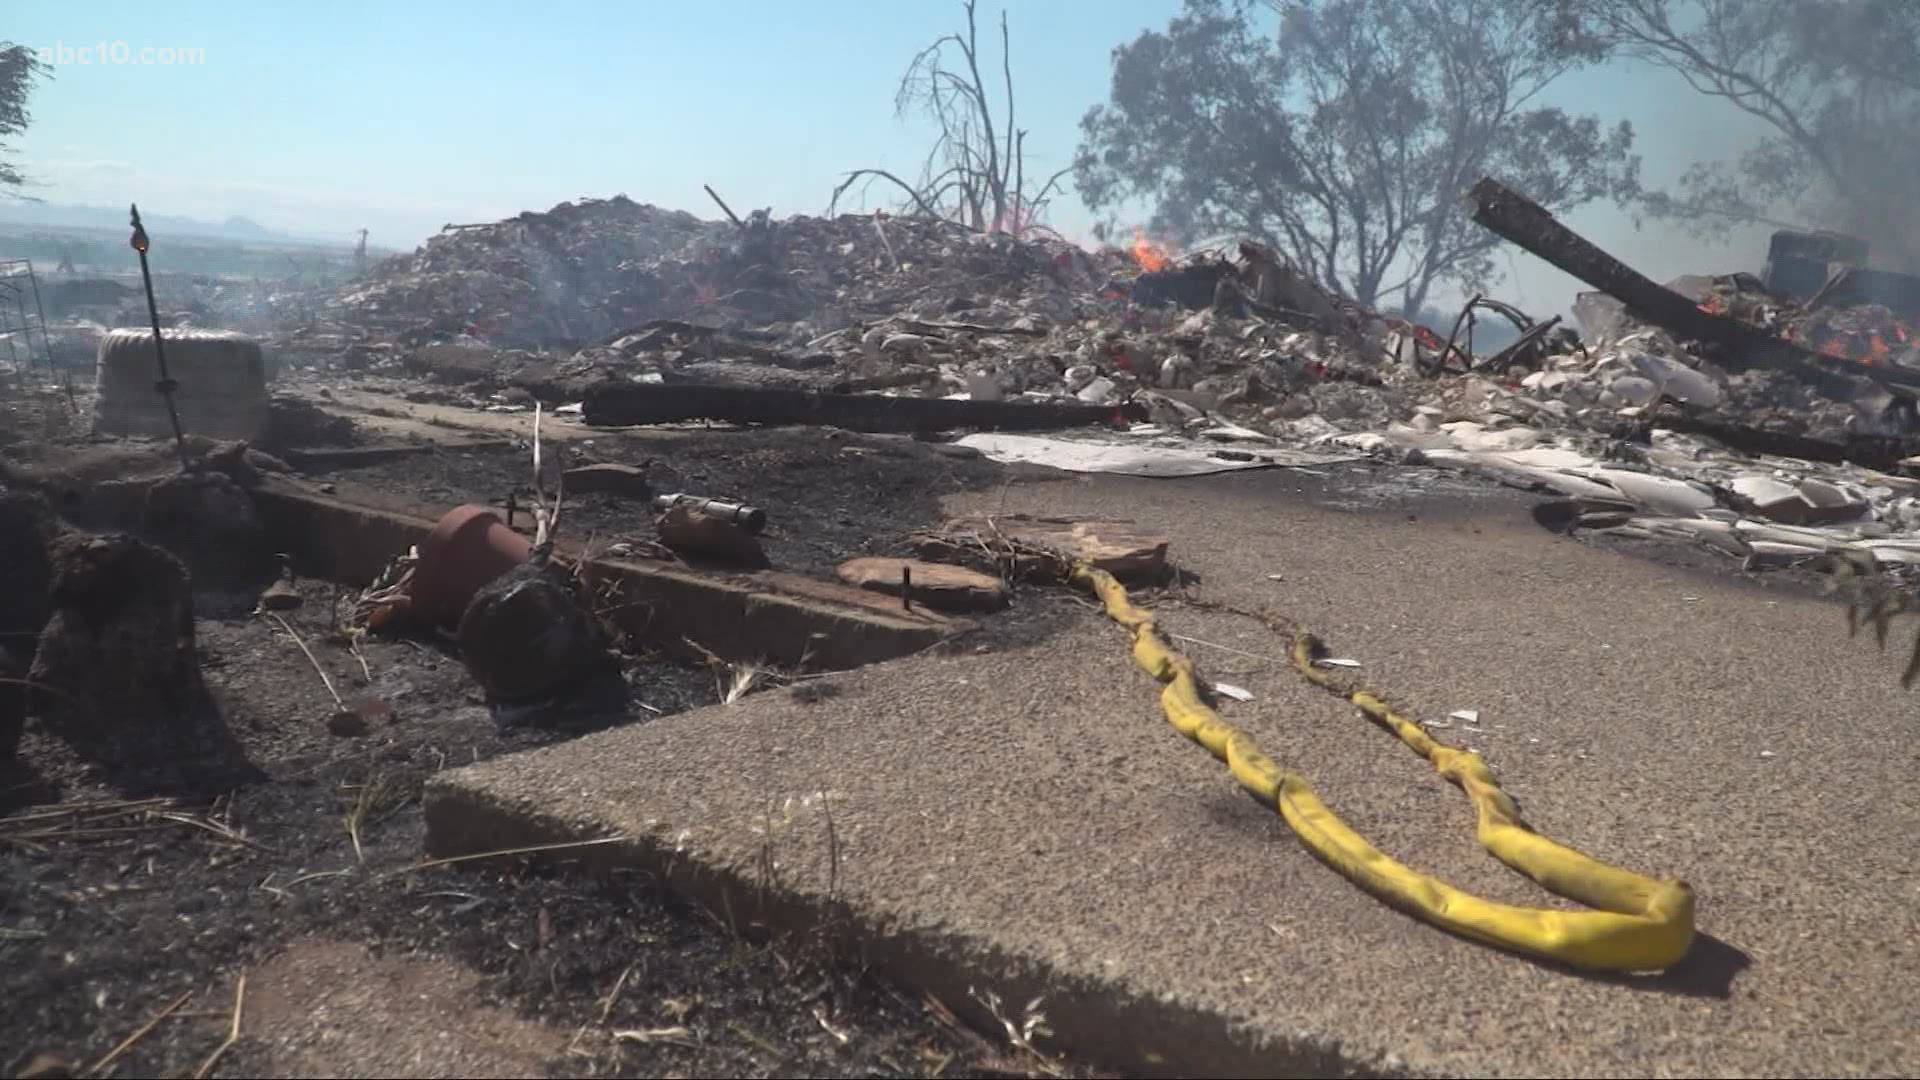 A wildfire near Beale Air Force Base in Yuba County burned at least 900 acres and destroyed at least one home Tuesday afternoon.